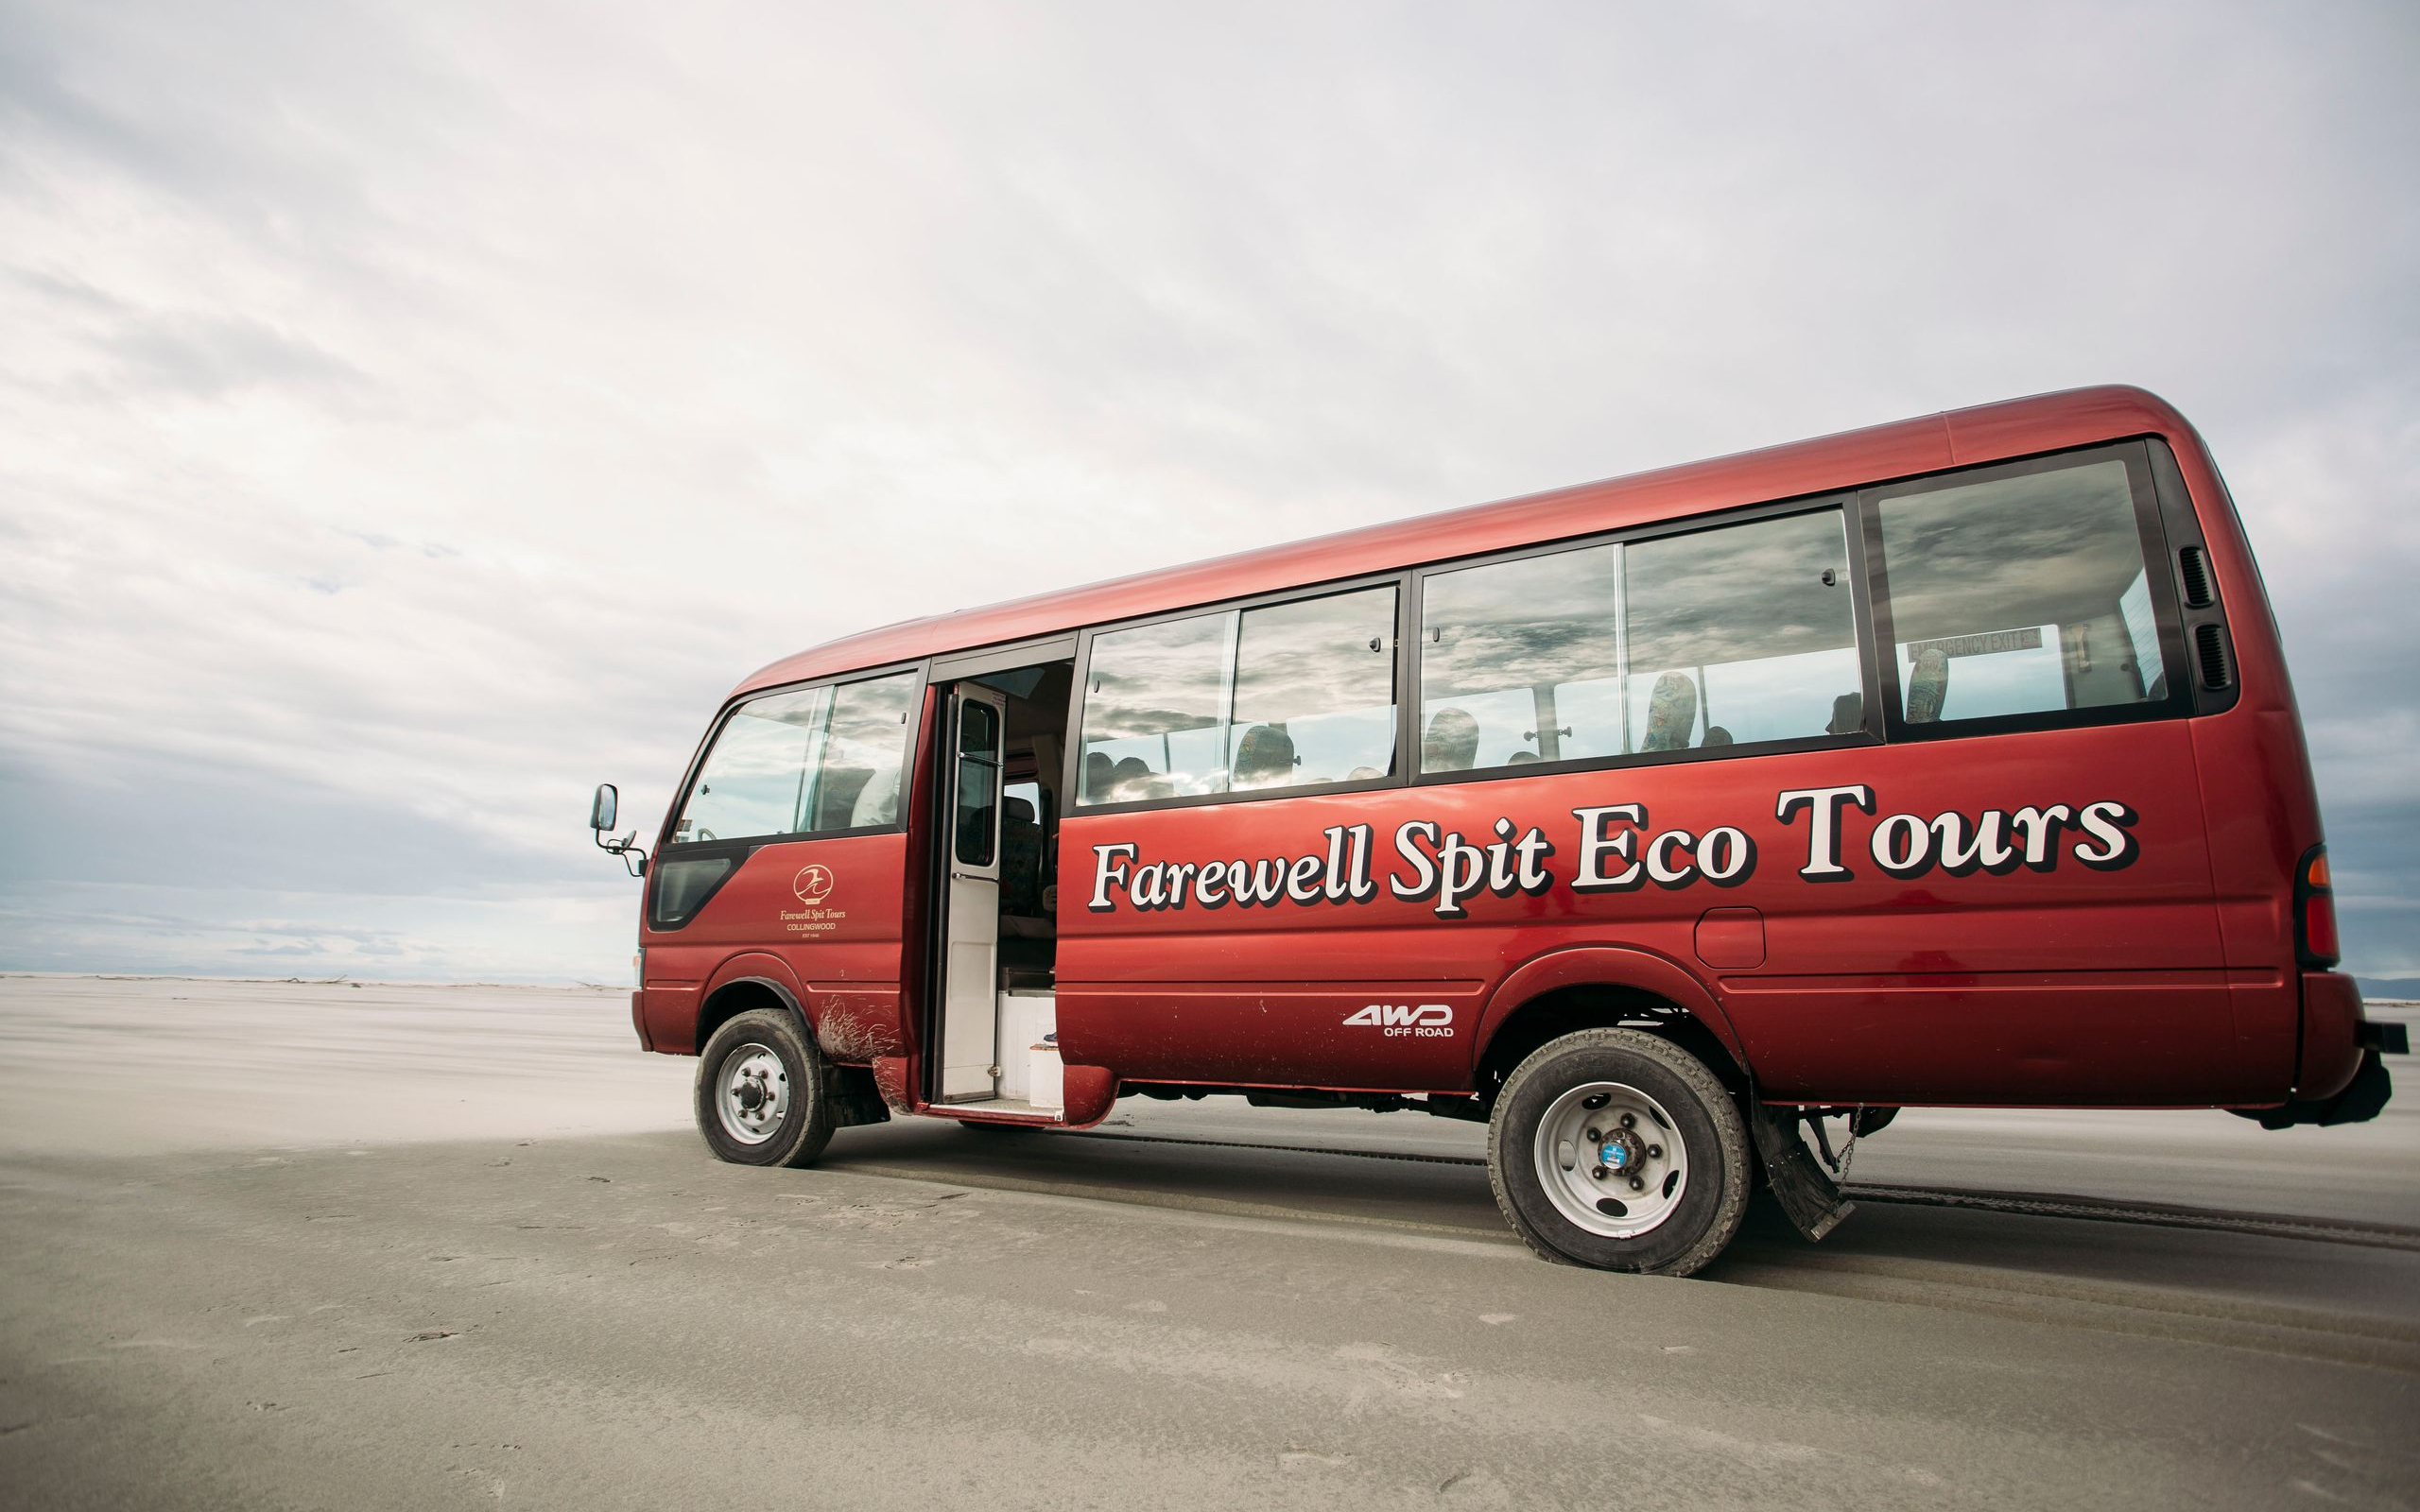 Farewell Spit Tours